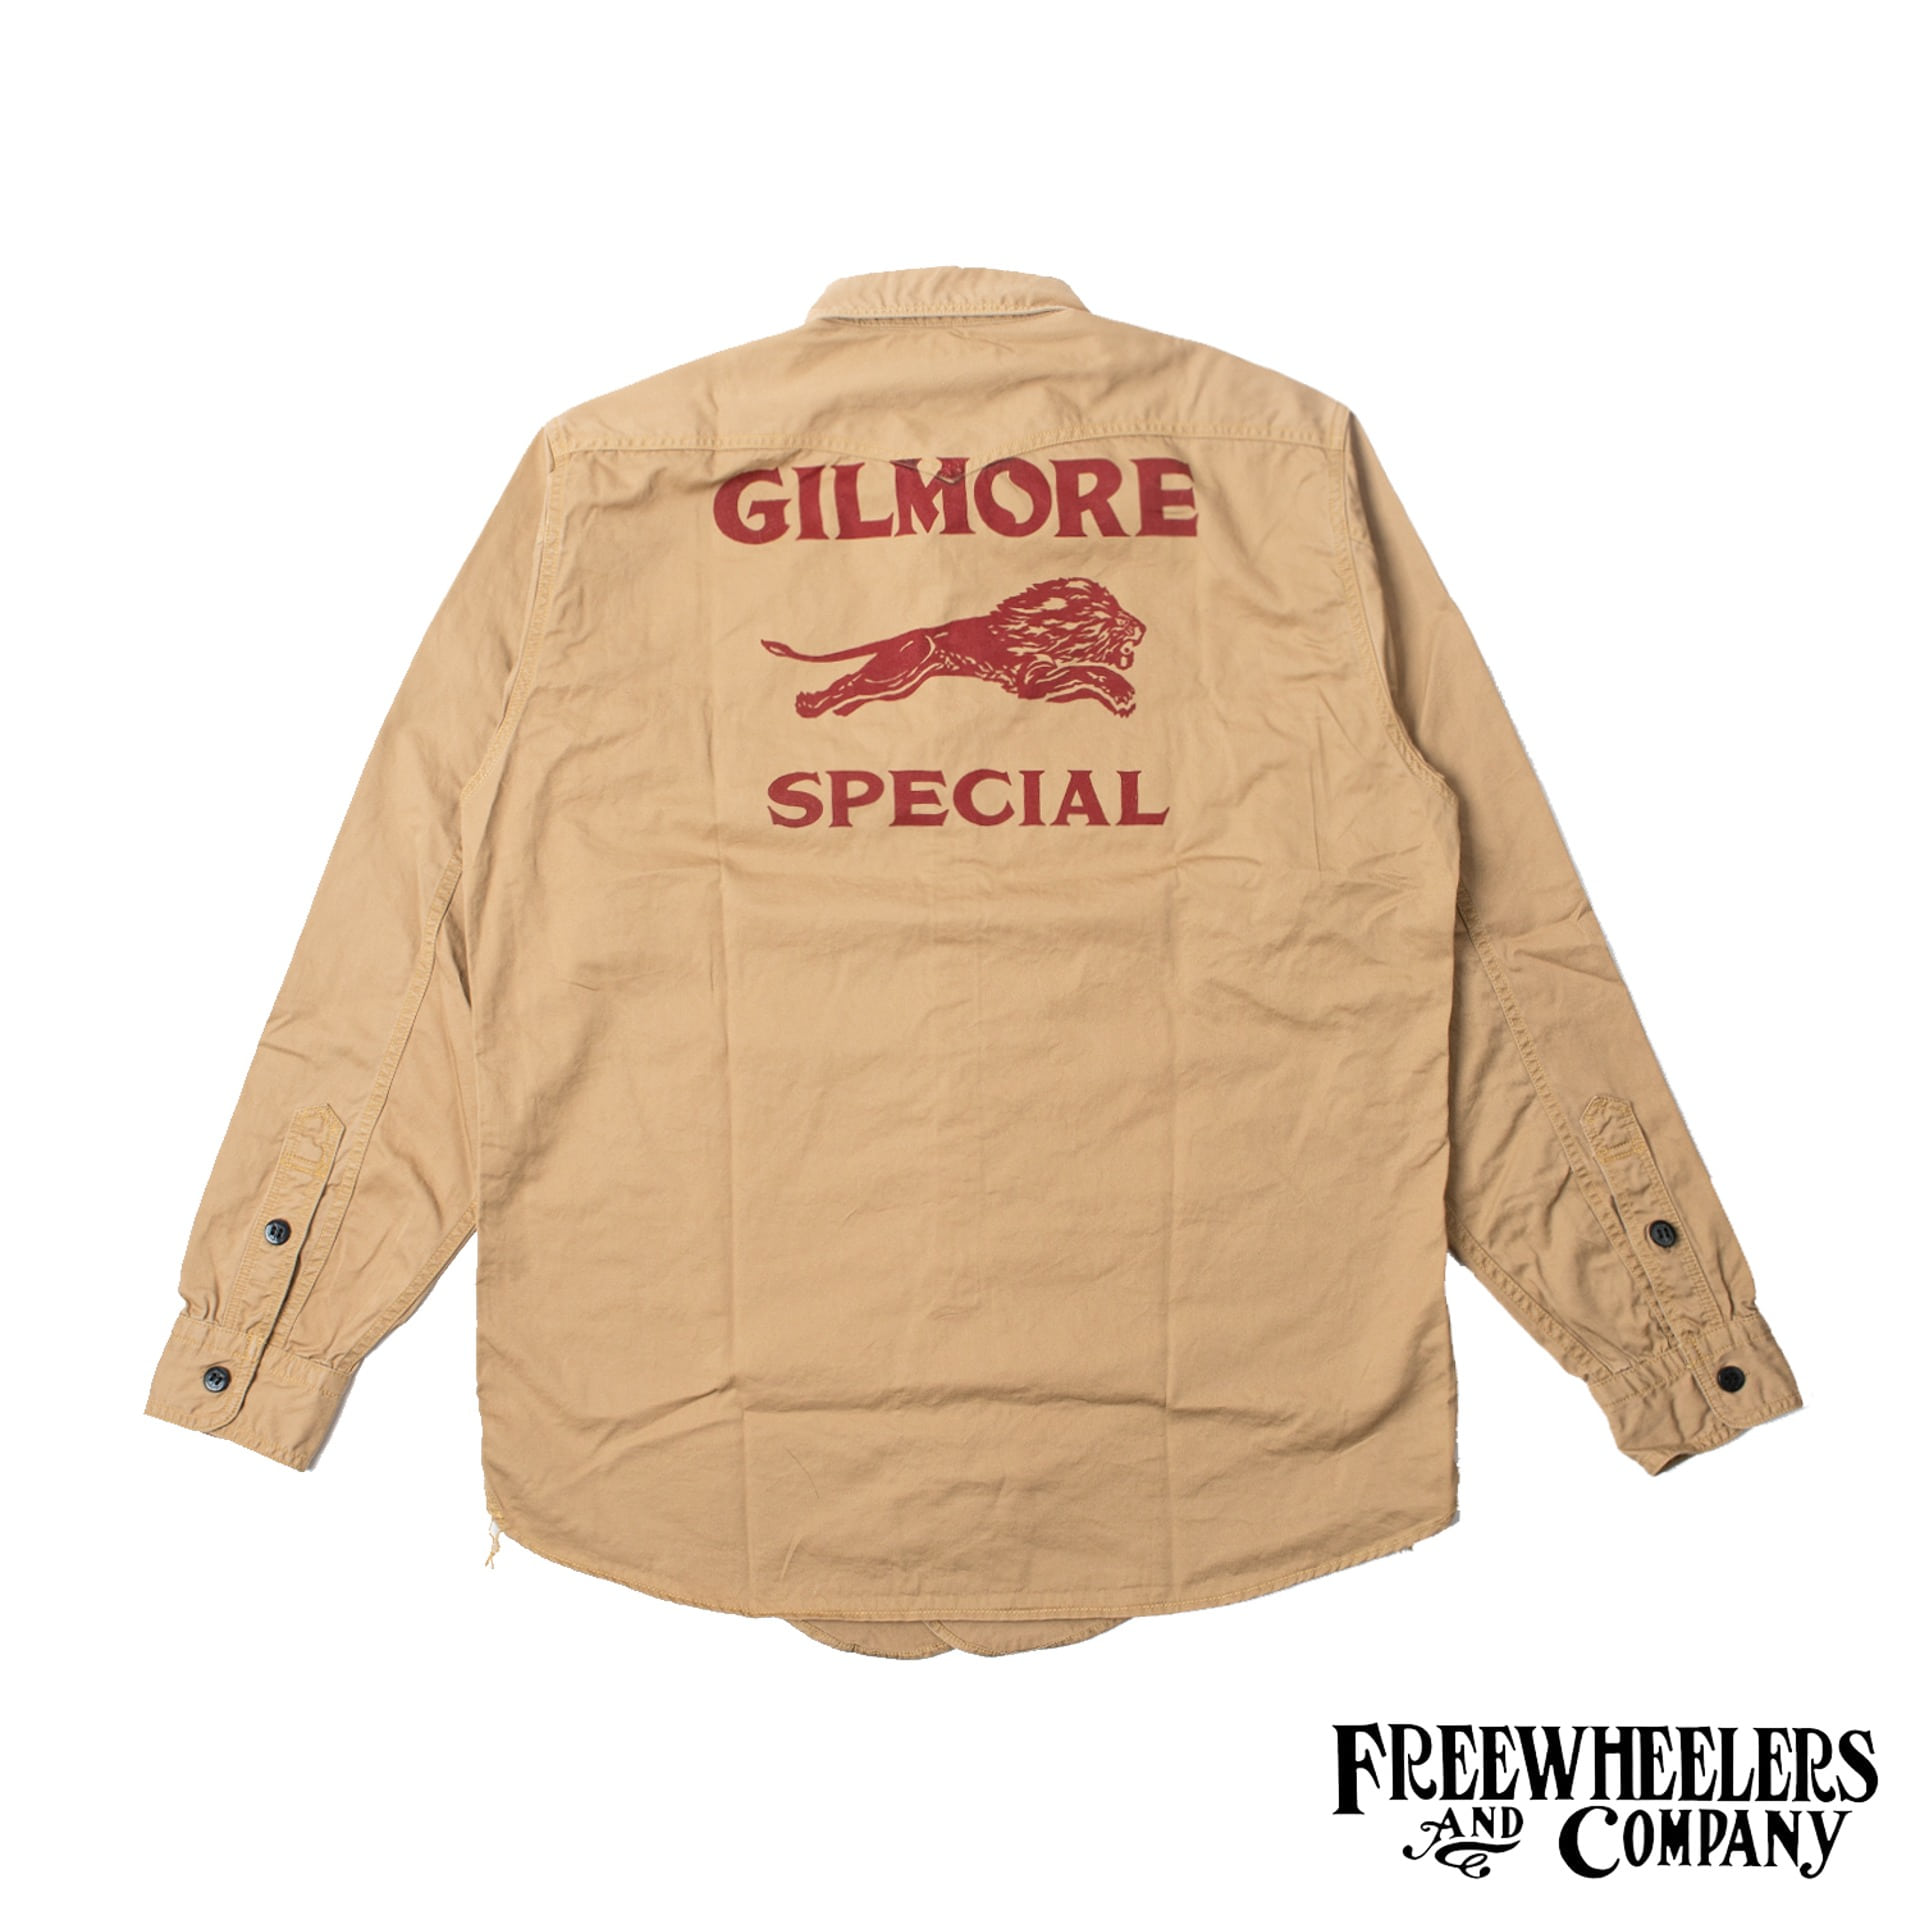 [Union Special Overalls] 1910~1920s USNAVY STYLE UTILITY CLOTHING  U.S.NAVY OFFICER SHIRT  “GILMORE SPECIAL” (Khaki)